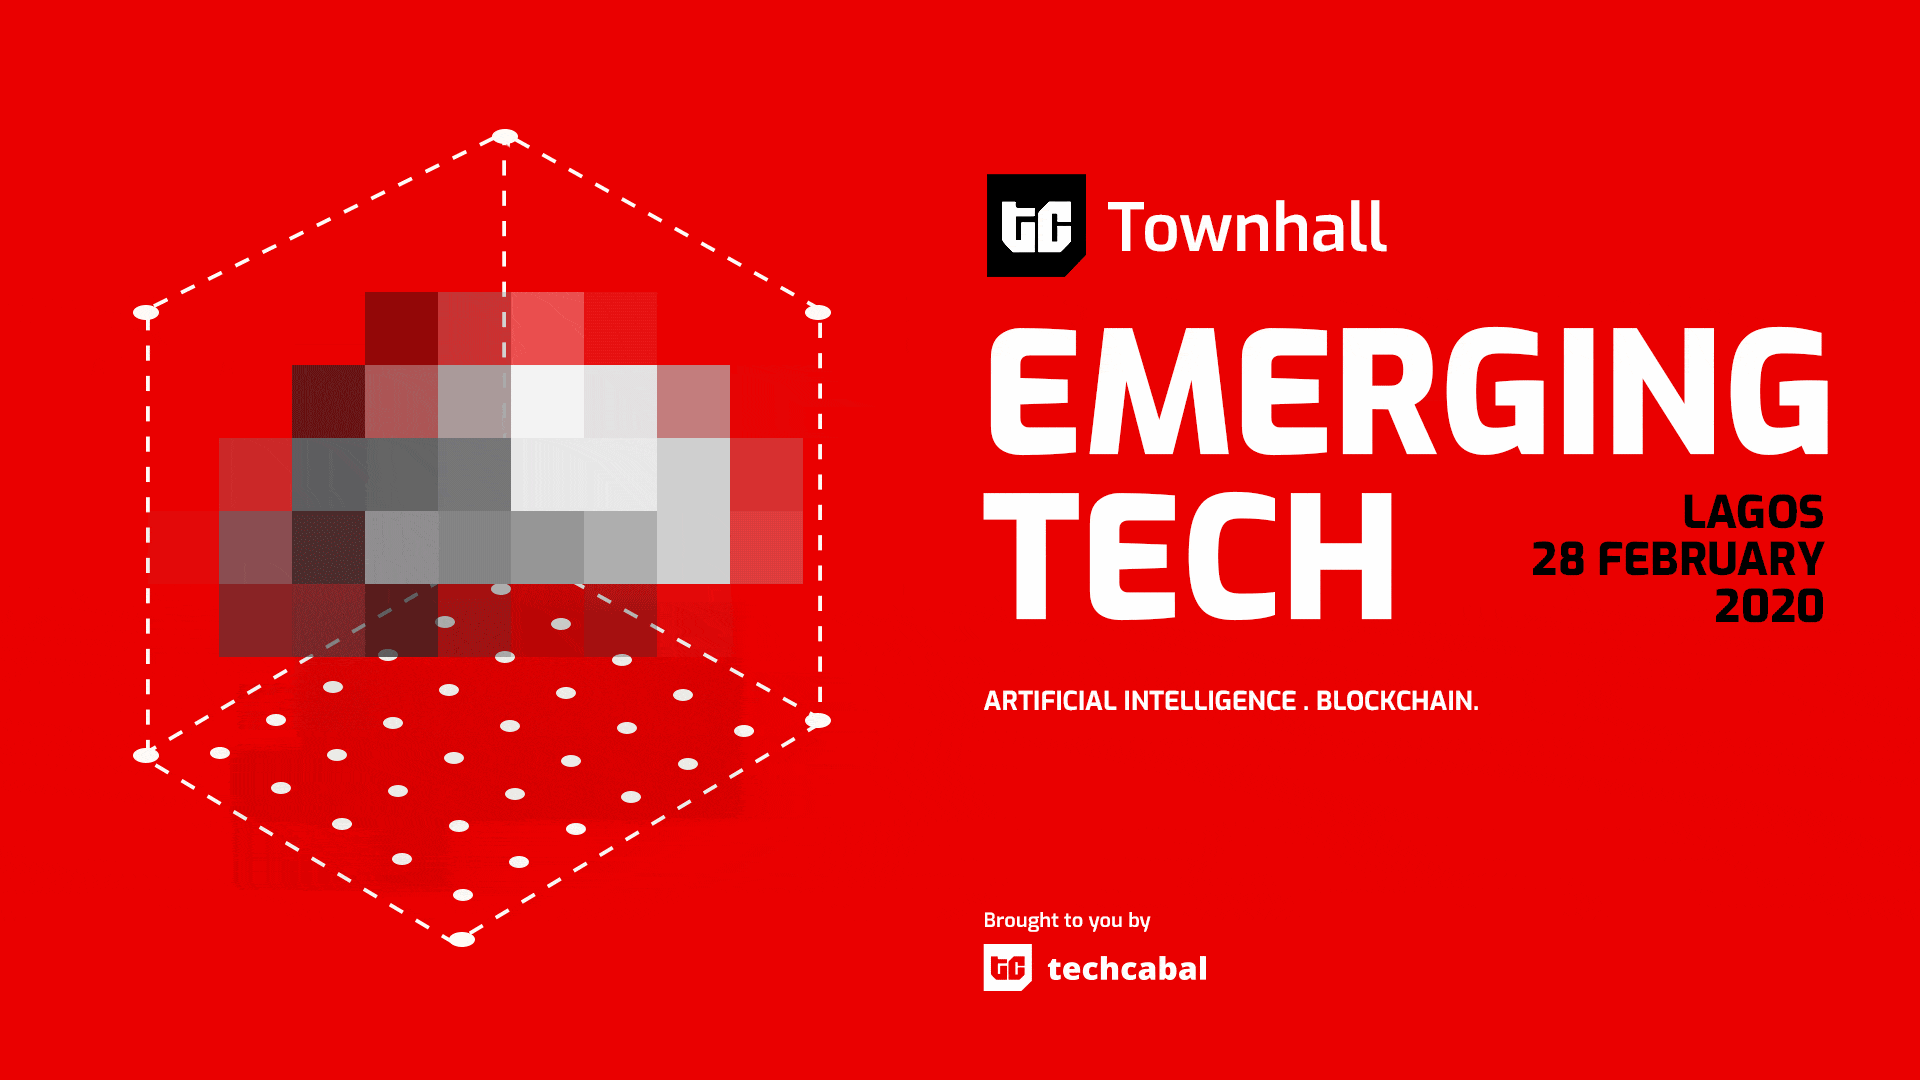 10 reasons why you should attend the Blockchain and Artificial Intelligence townhall